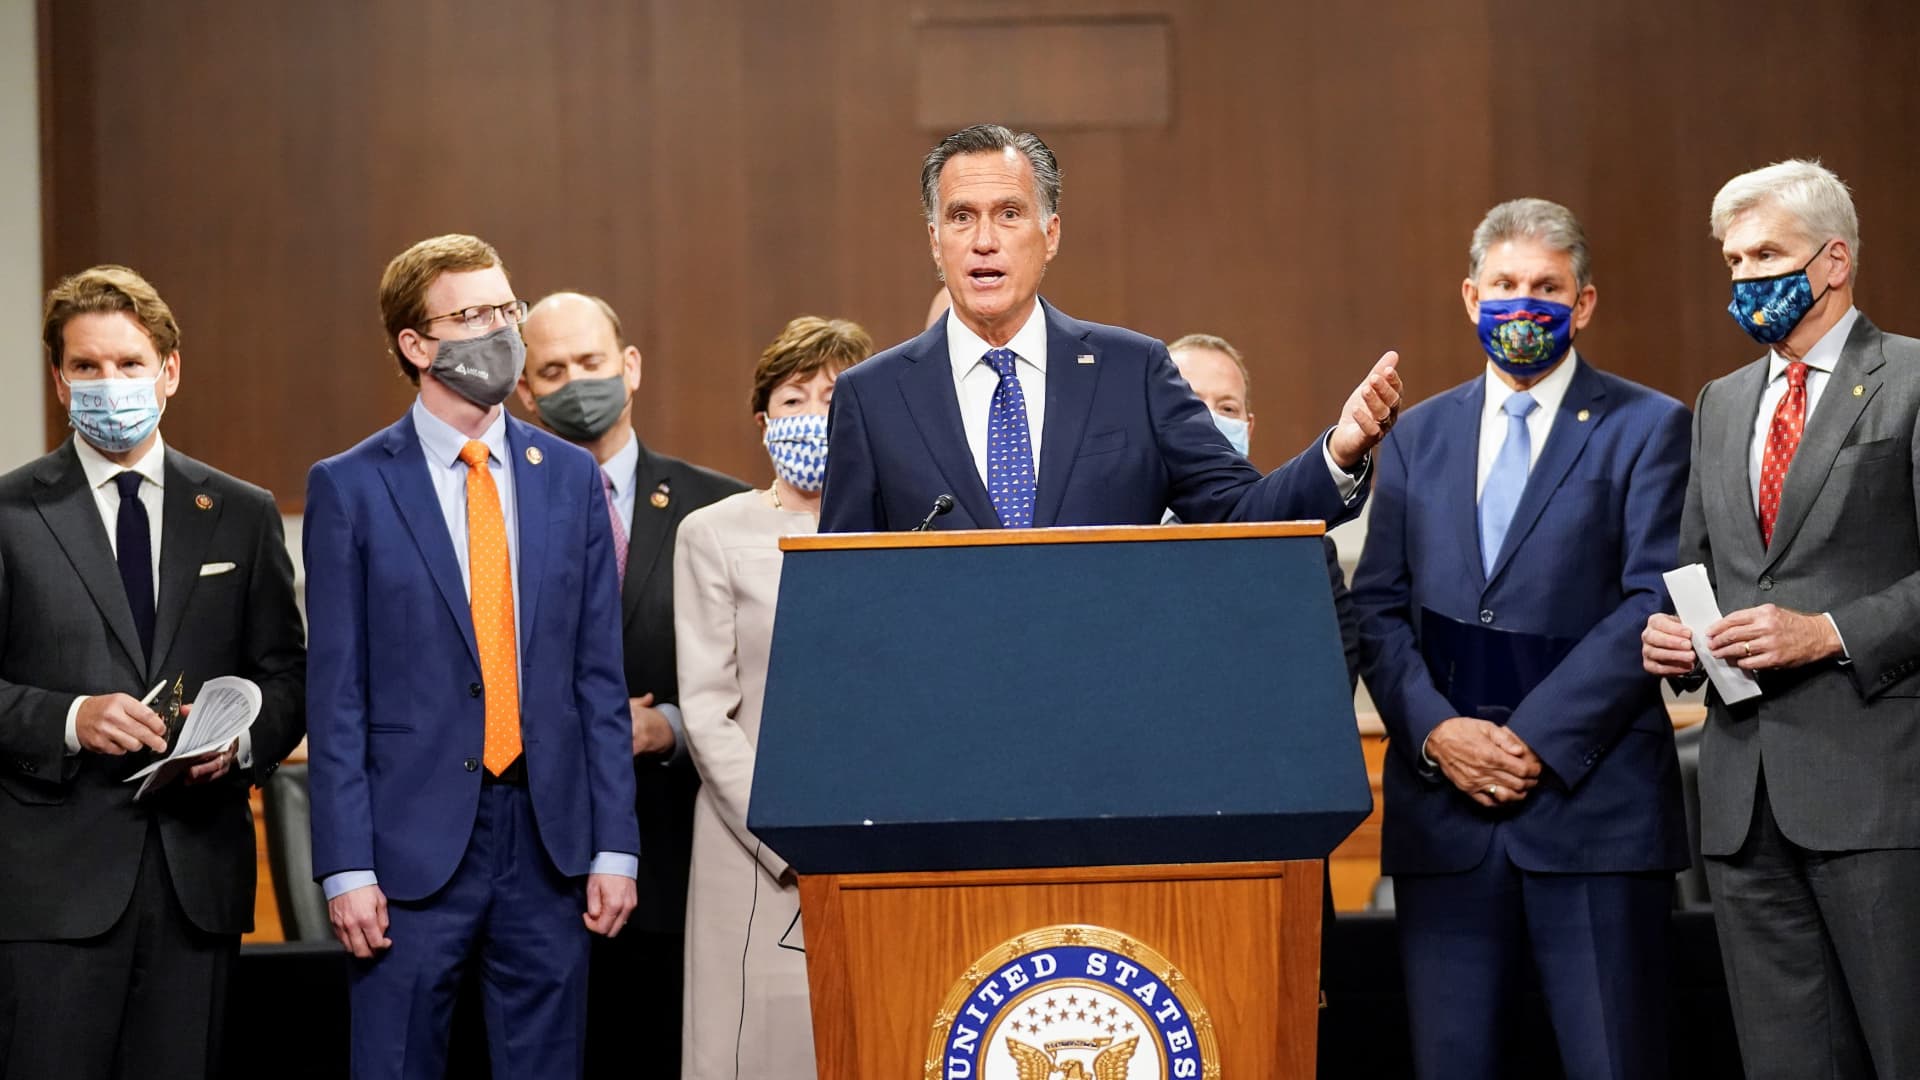 Sen. Mitt Romney (R-Utah) speaks as bipartisan members of the Senate and House gather to announce a framework for fresh coronavirus relief legislation at a news conference on Capitol Hill on Dec. 1, 2020.